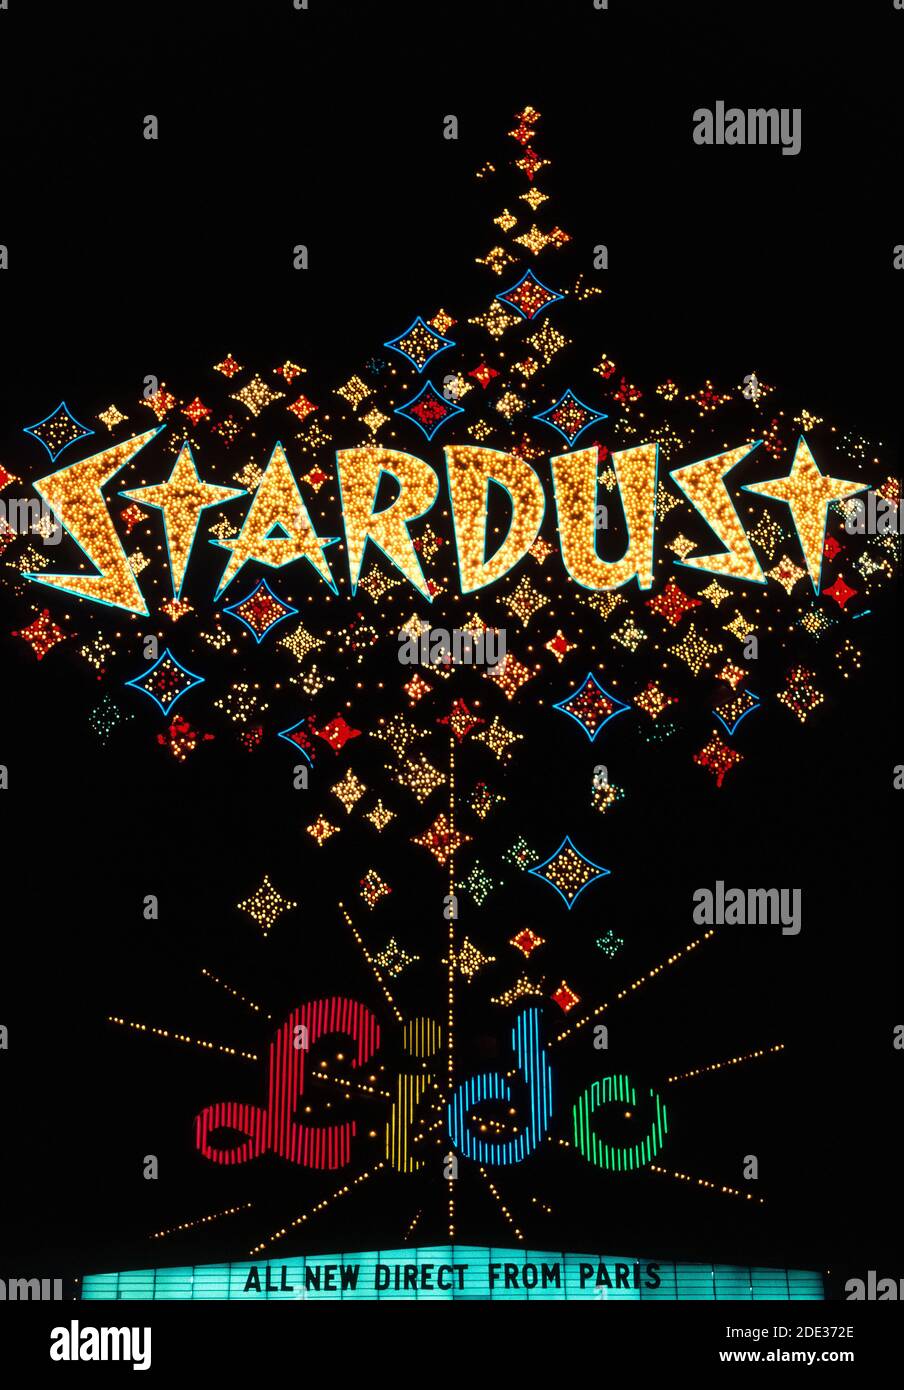 Neon and other colorful lights made this sparkling outdoor sign for the Stardust Resort and Casino stand out at night along Las Vegas Blvd., better known as the Strip, a roadway lined with spectacular resort hotels and casinos just south of the city limits of Las Vegas, Nevada, USA. The Stardust opened in 1958 in that notorious desert destination well-known for its gambling and good times. Its roadside sign changed in design and shape several times before and after this historical photograph was taken in 1983. The Stardust was demolished after closing in 2006, and this sign is only a memory. Stock Photo